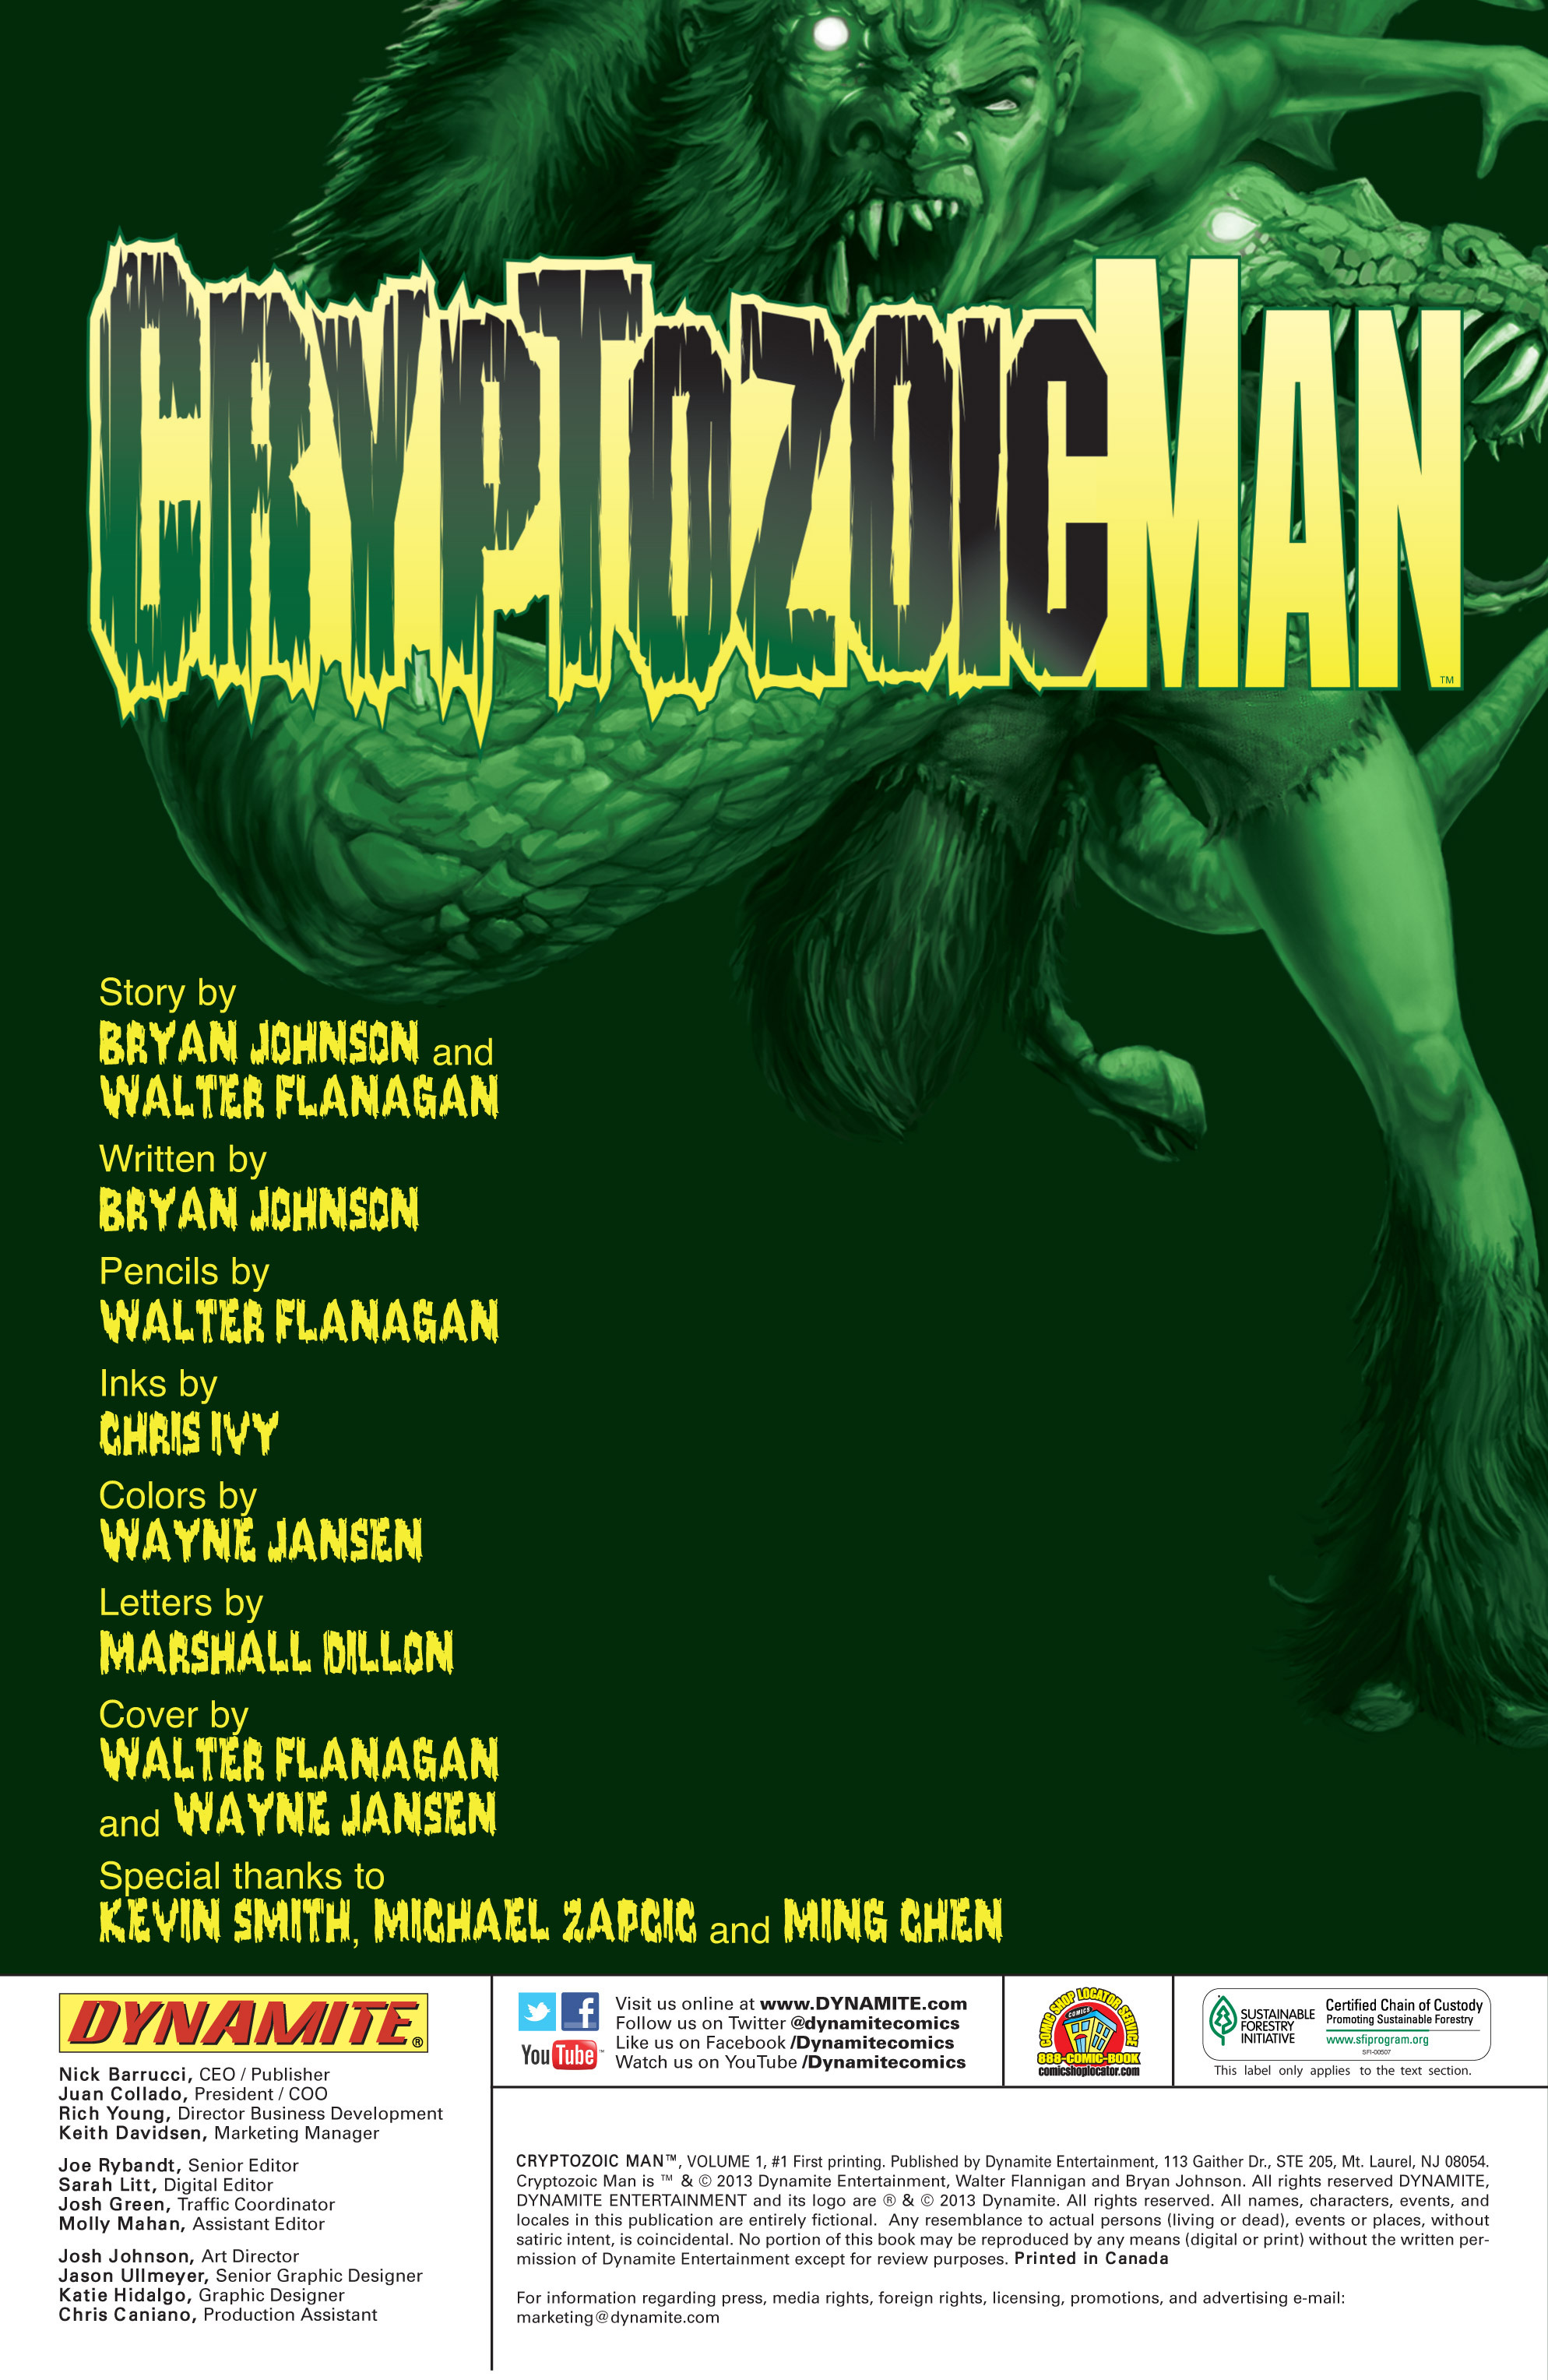 Read online Cryptozoic Man comic -  Issue #1 - 2